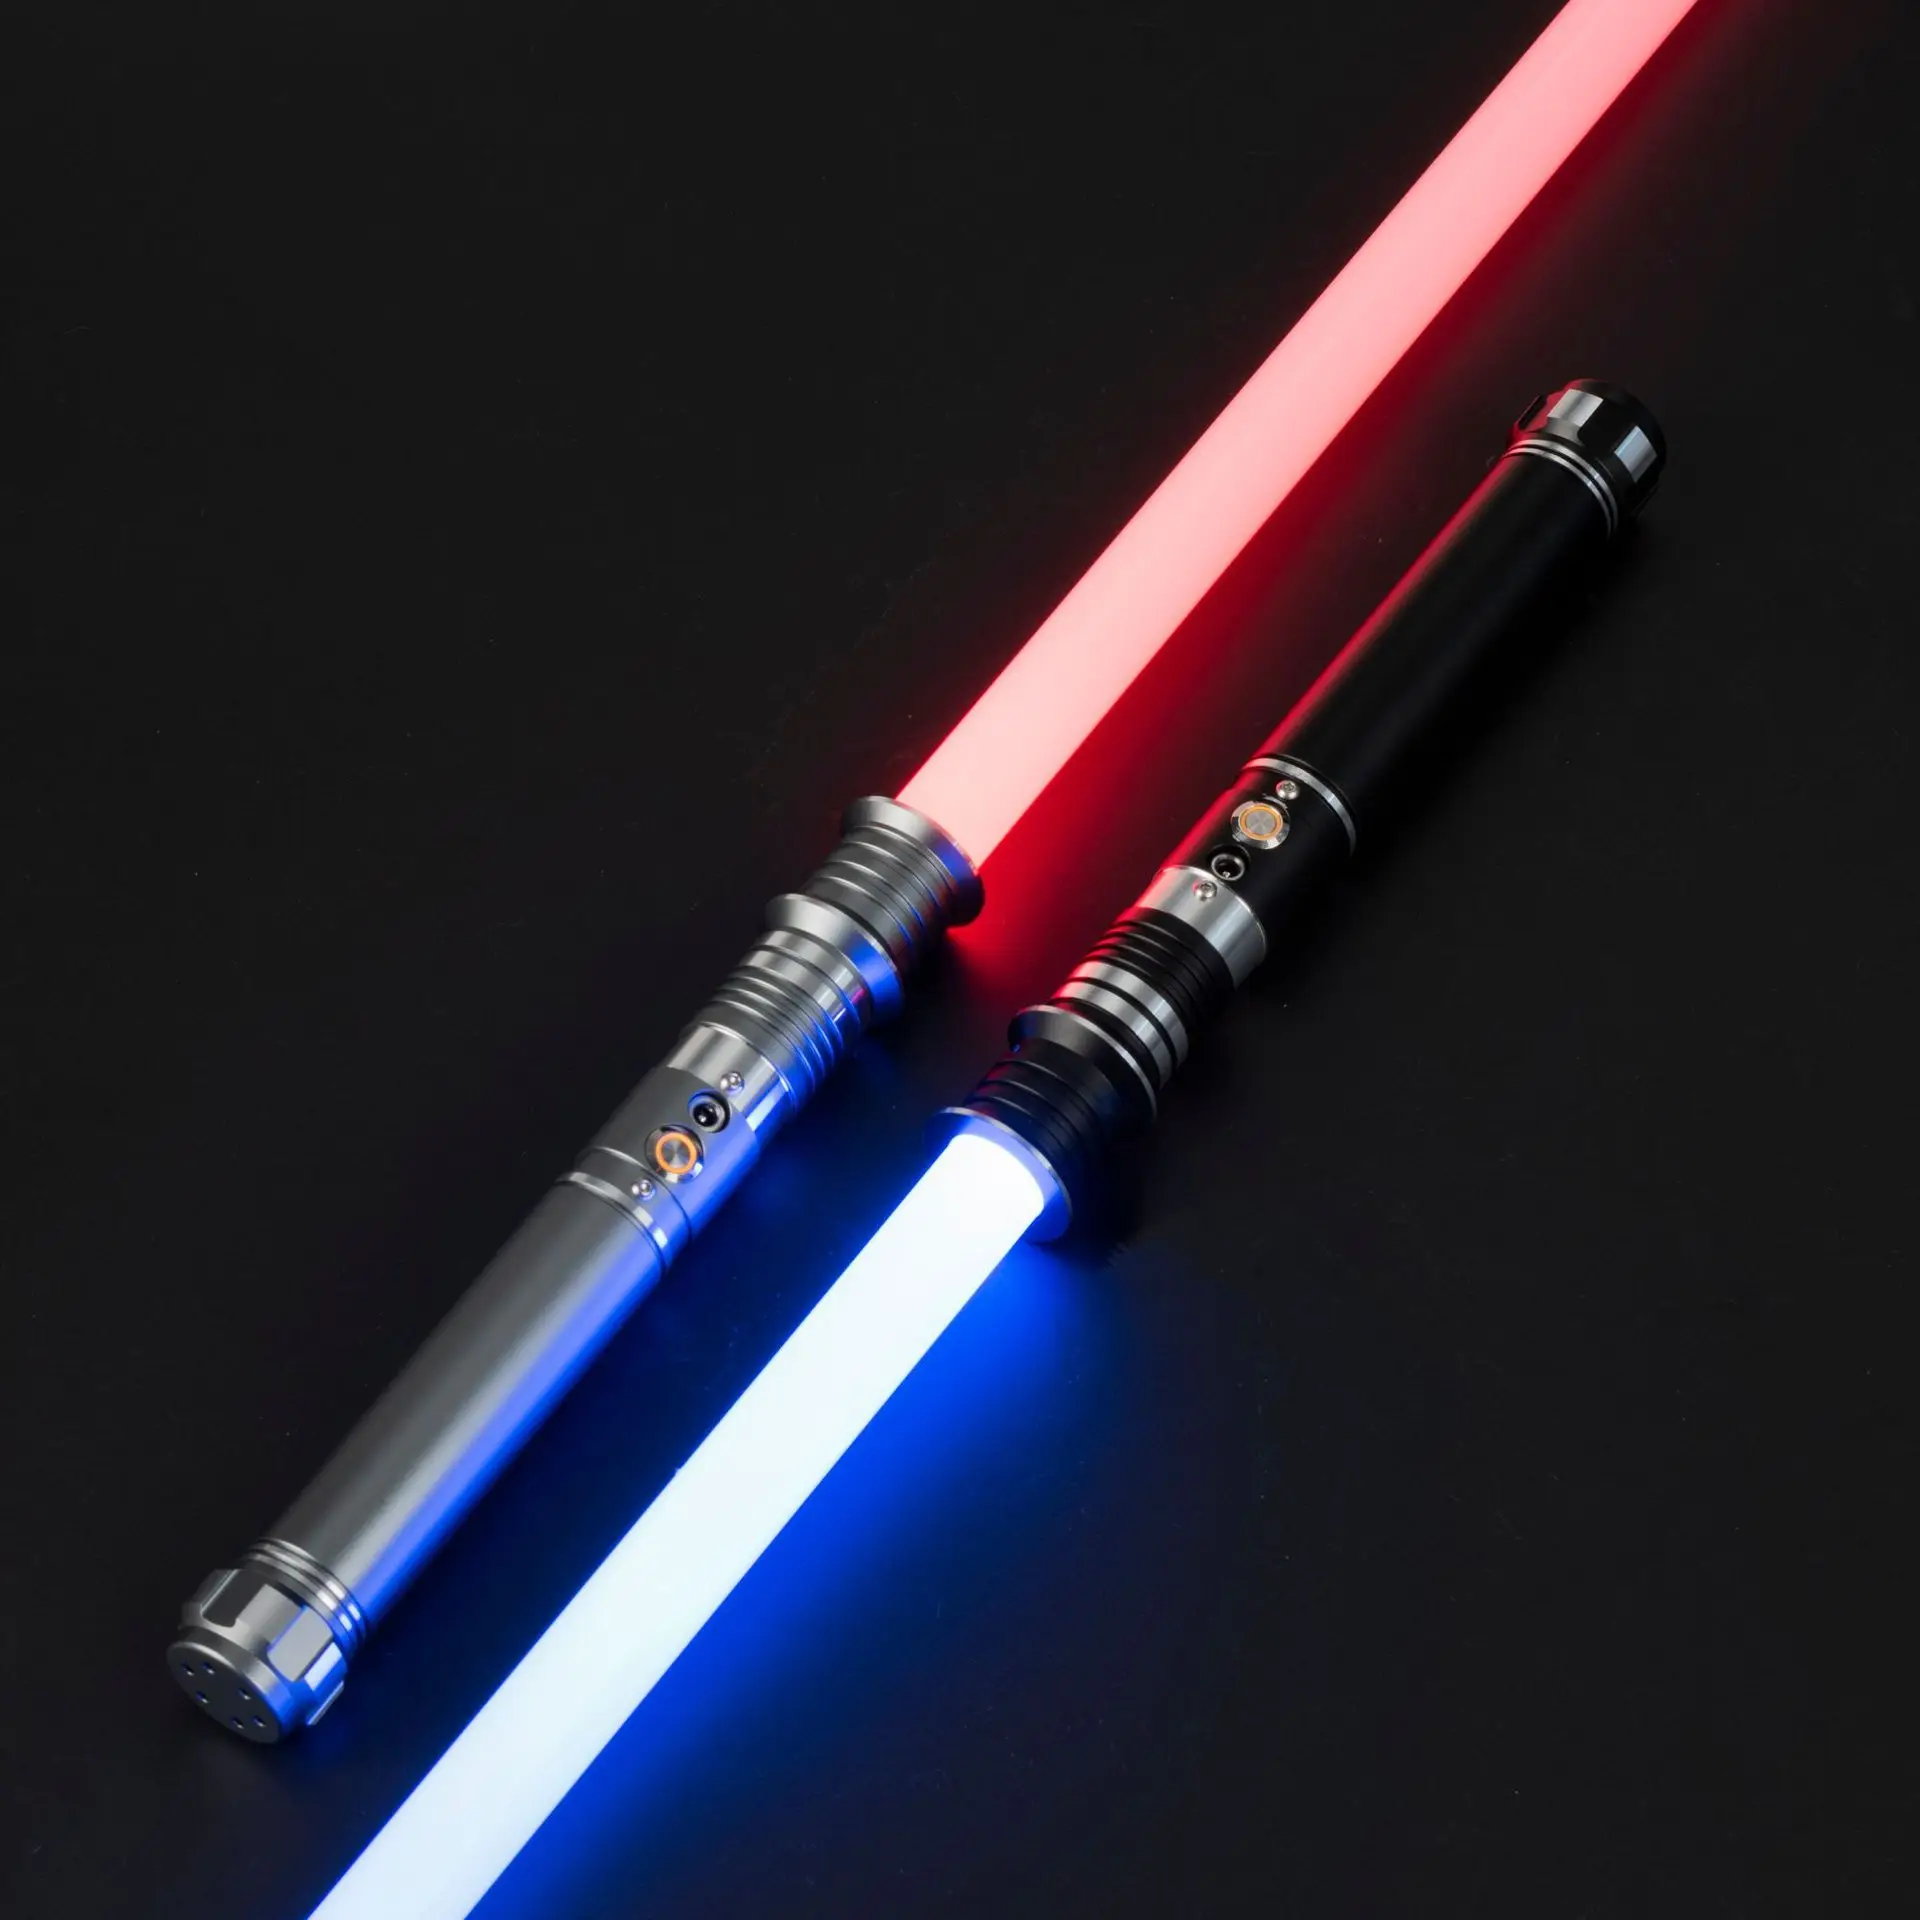 

New Lightsaber Metal Handle Heavy Dueling Blade 16 Color Change Saber With Highlight Sensitive Smooth Swing Laser Sword Glow Toy